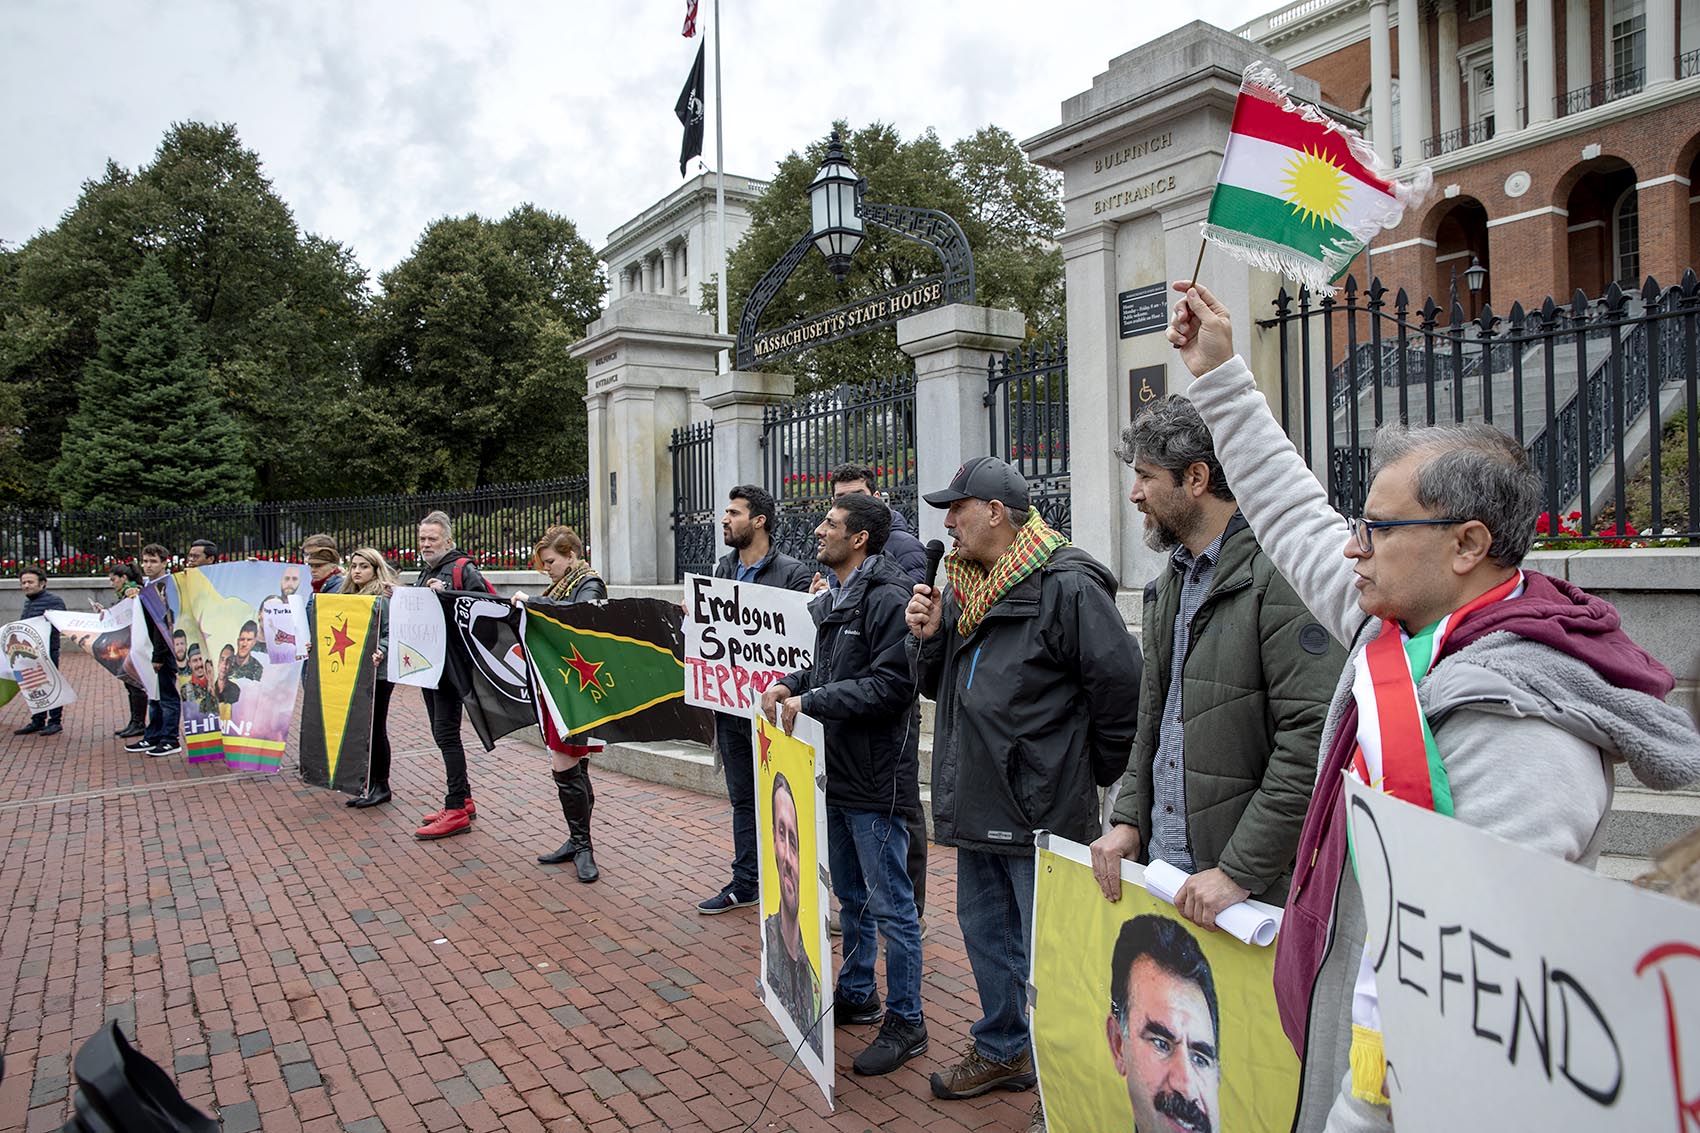 Protesters at a rally organized by two New England Kurdish associations chant and wave banners in front of the Massachusetts State House. (Robin Lubbock/WBUR)